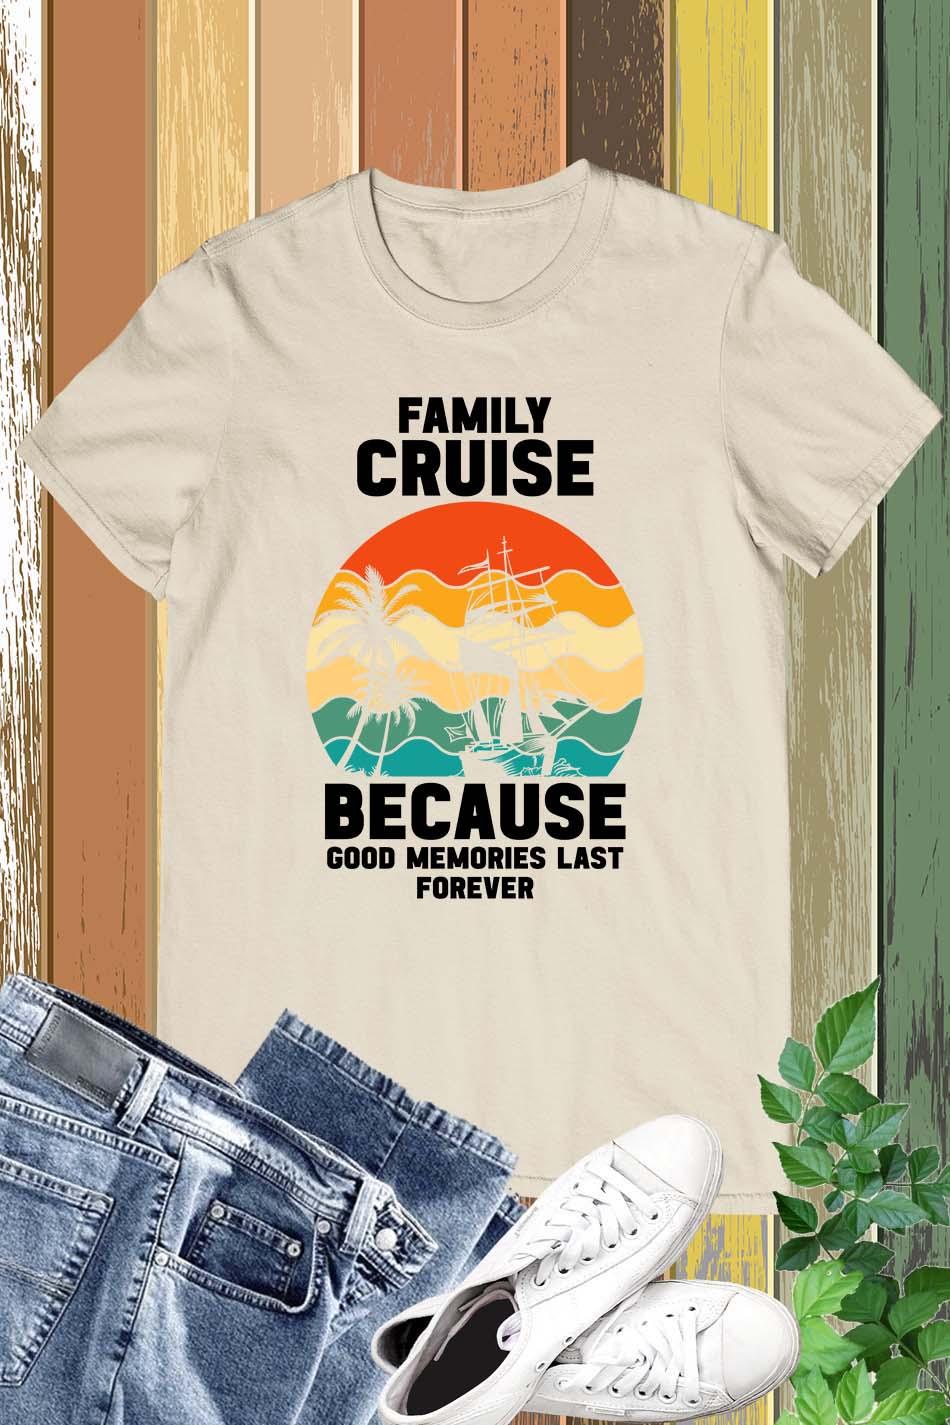 Family Cruise  Memories Together Spring Breaks Shirt